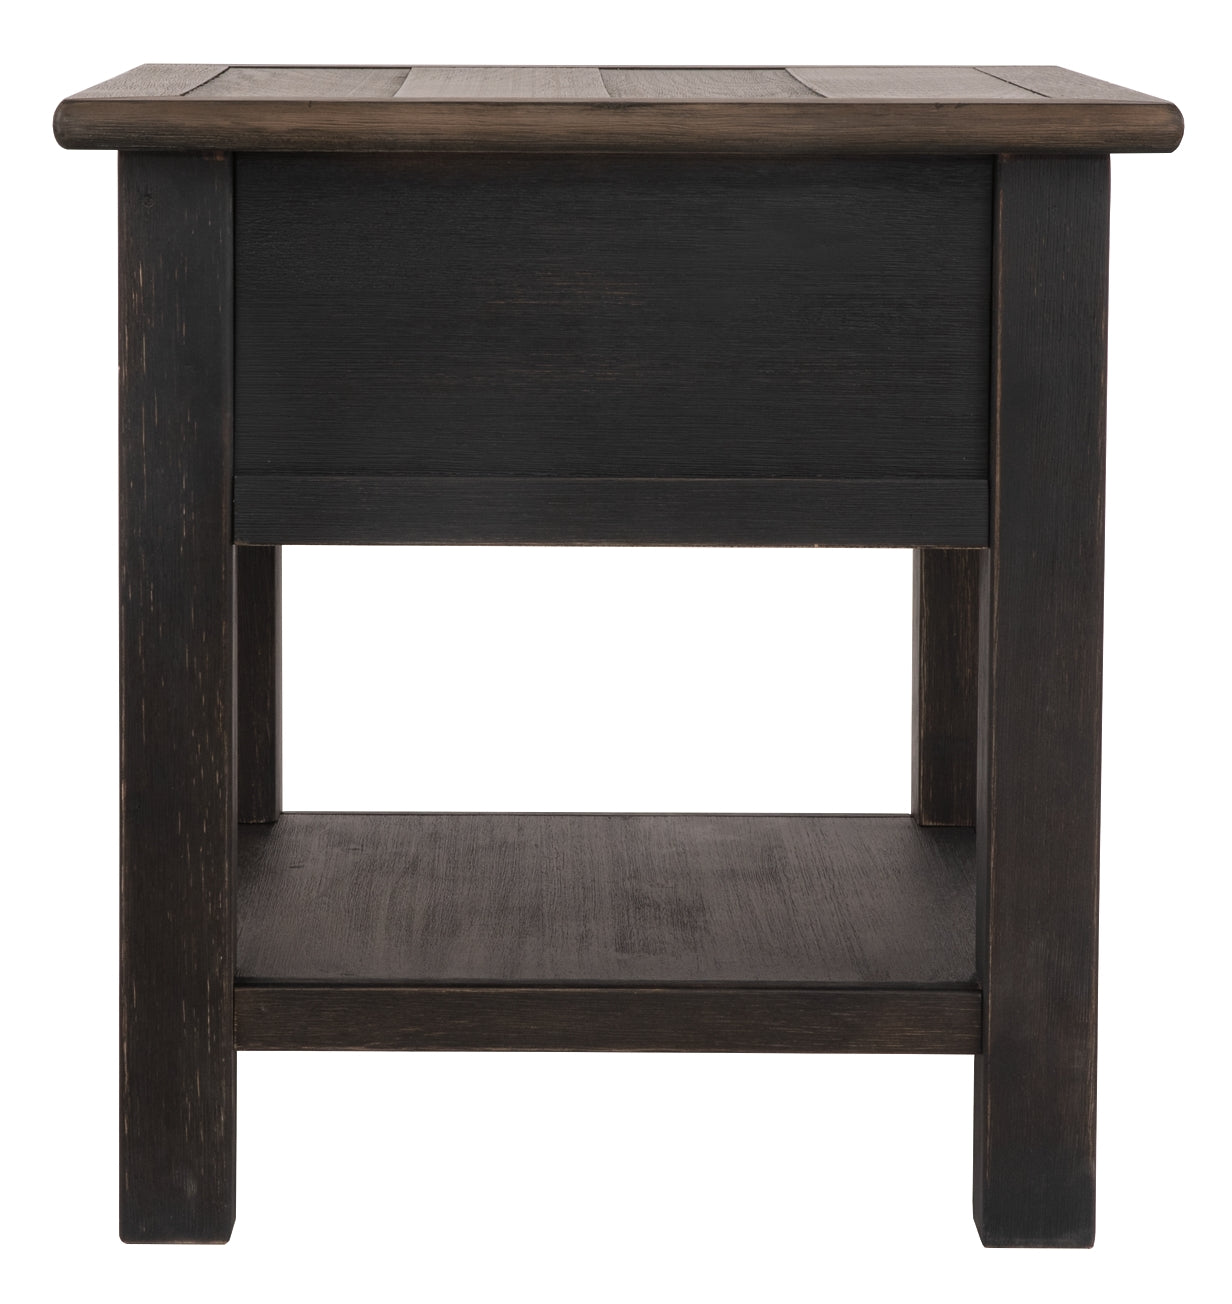 Tyler Creek Rectangular End Table at Walker Mattress and Furniture Locations in Cedar Park and Belton TX.